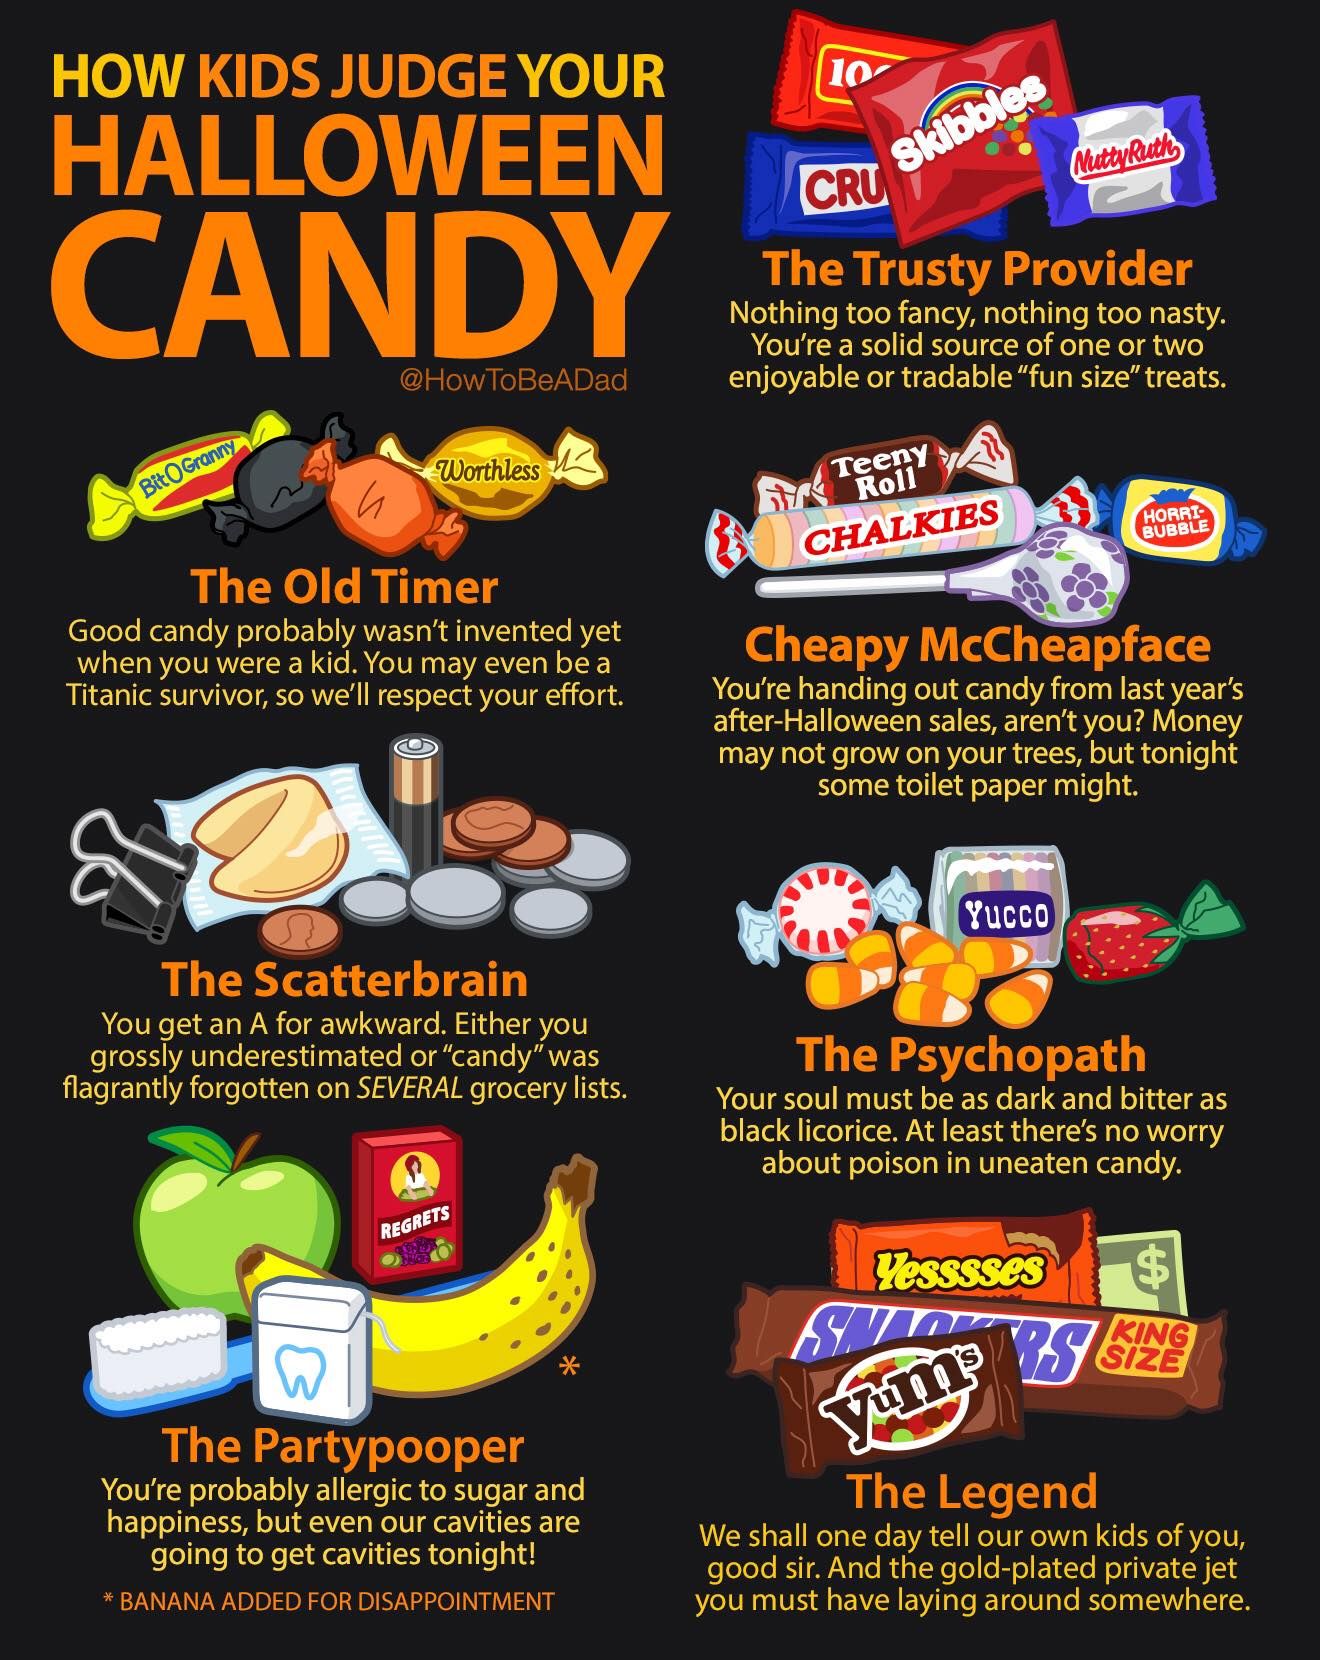 How kids judge your Halloween candy.